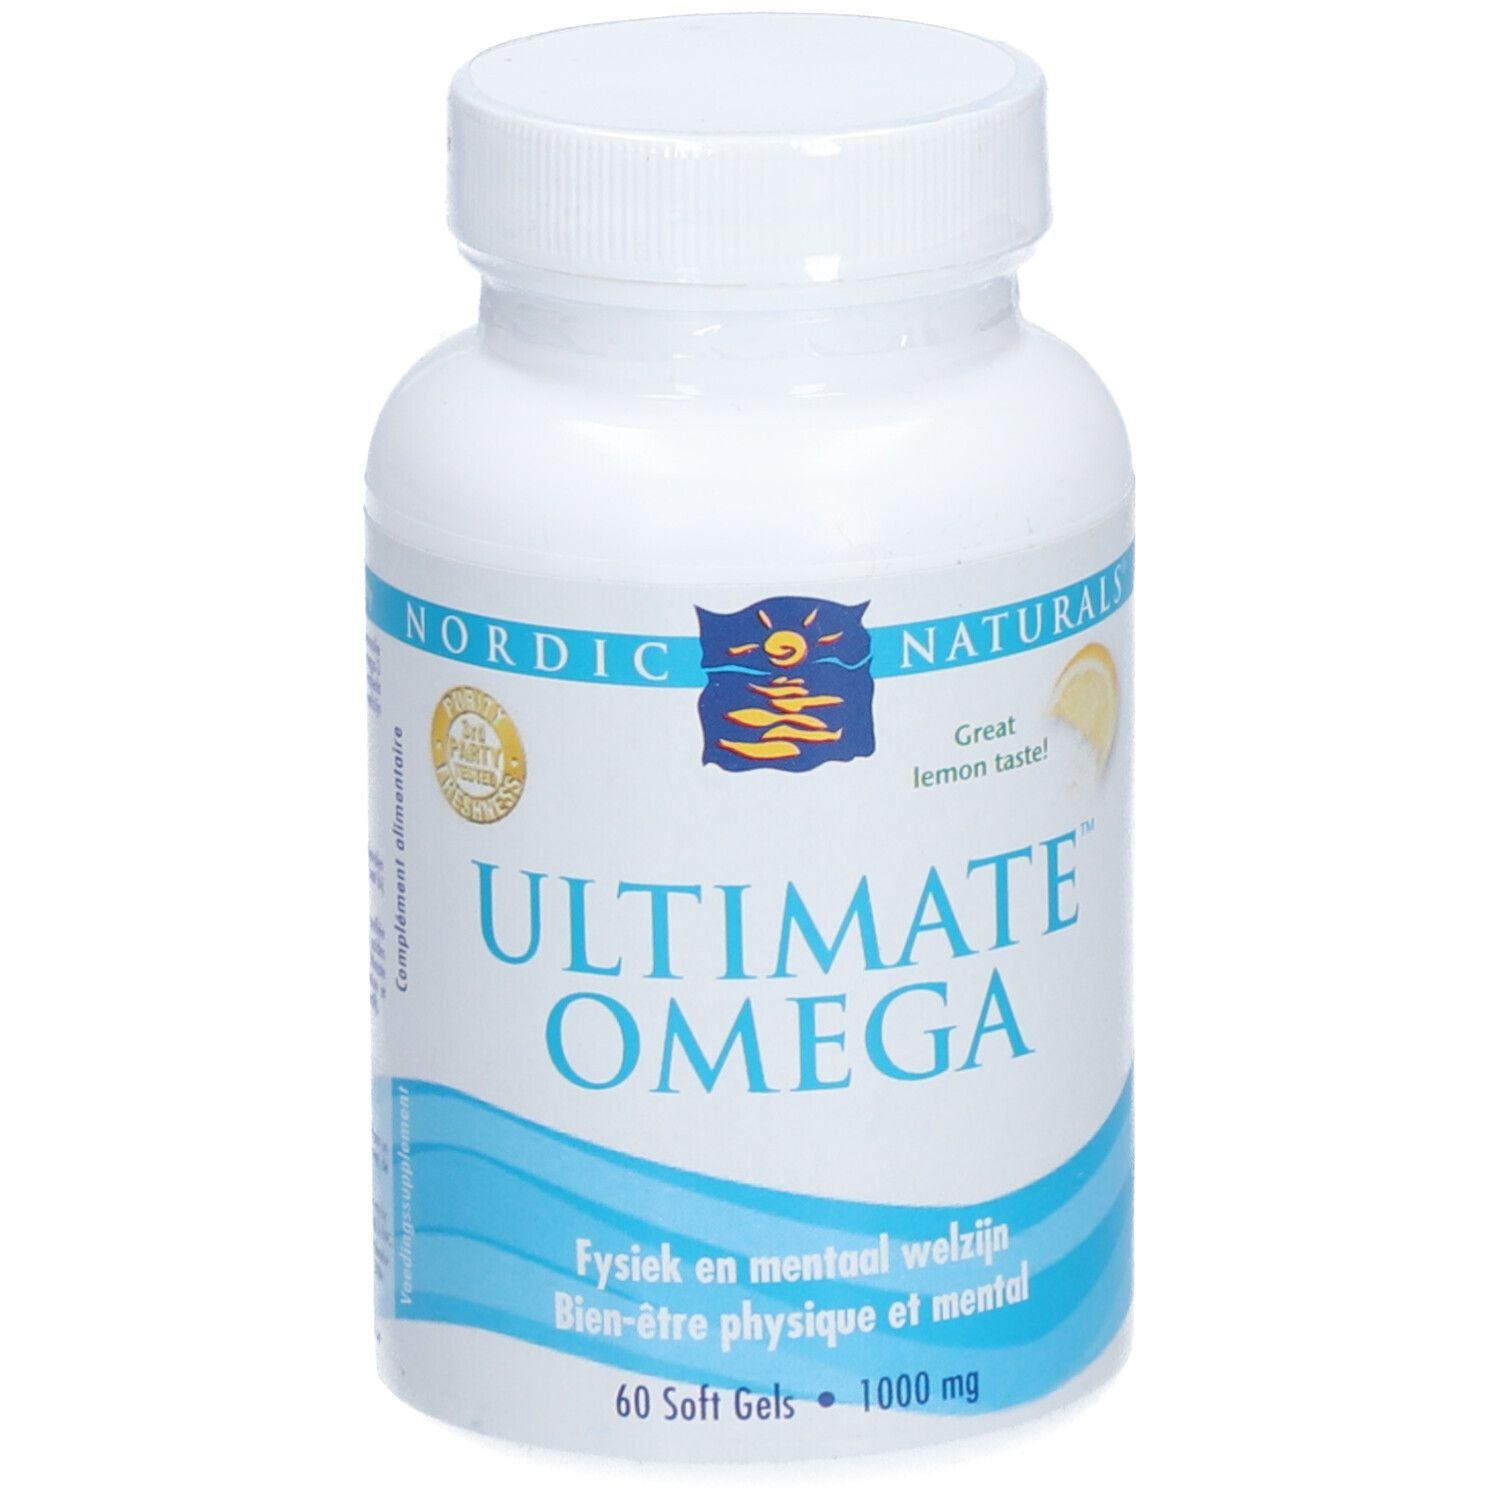 COMPLEMED GROUP Nordic Naturals Ultimate Omega